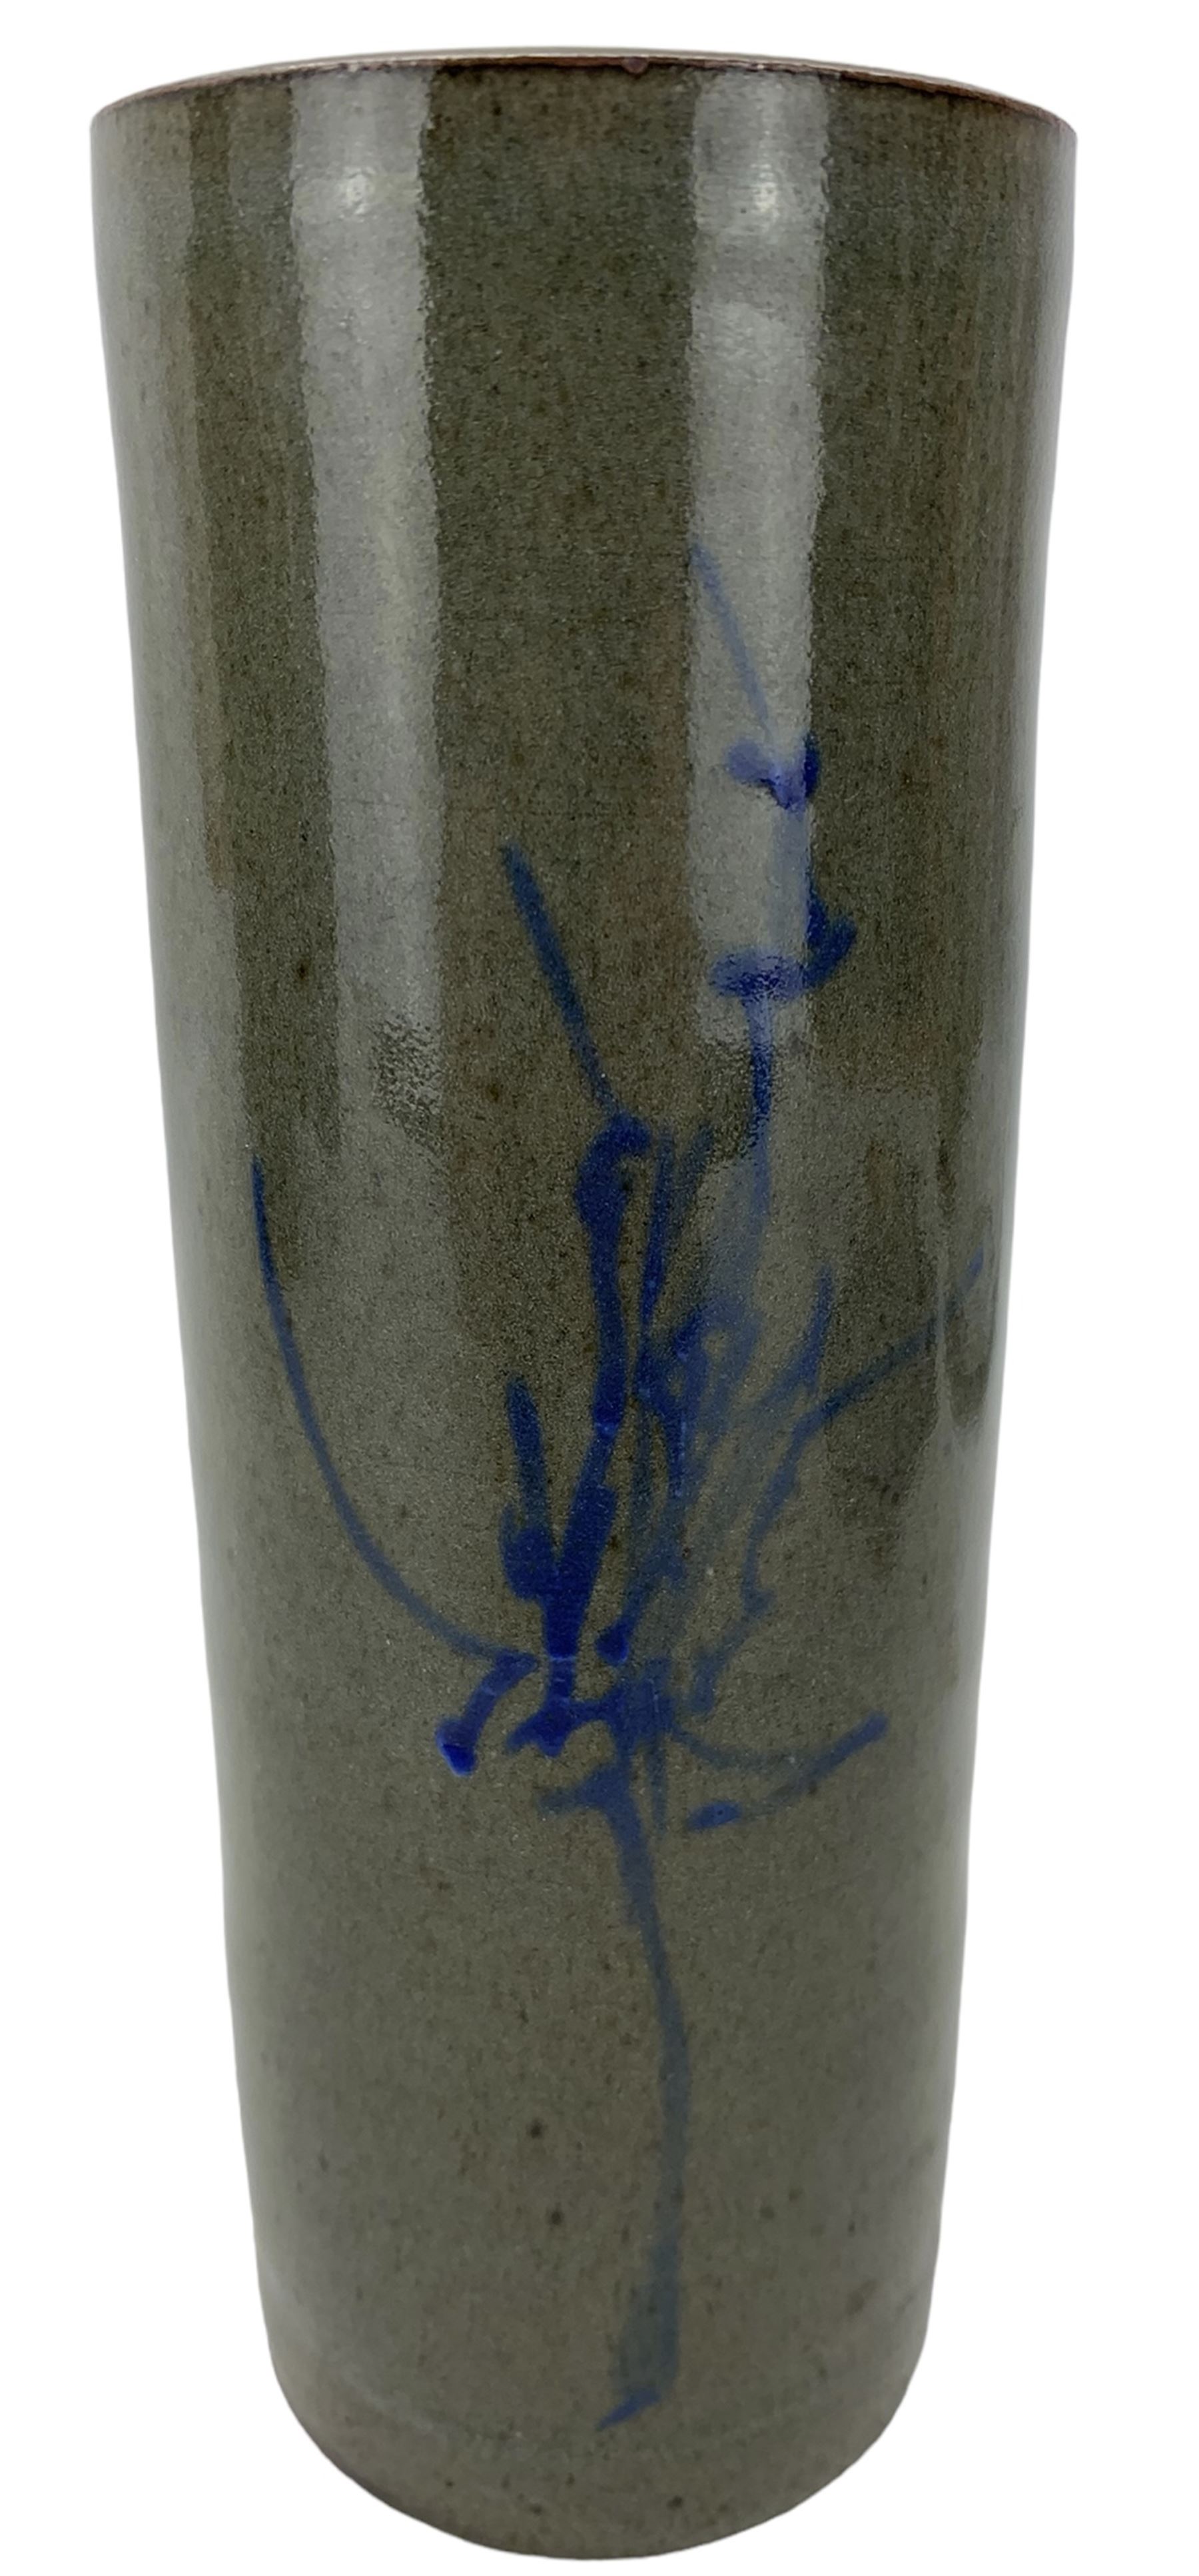 Rowlstone studio pottery vase by Michael Toovey of panel sided design with a brown glaze H30cm - Image 12 of 16